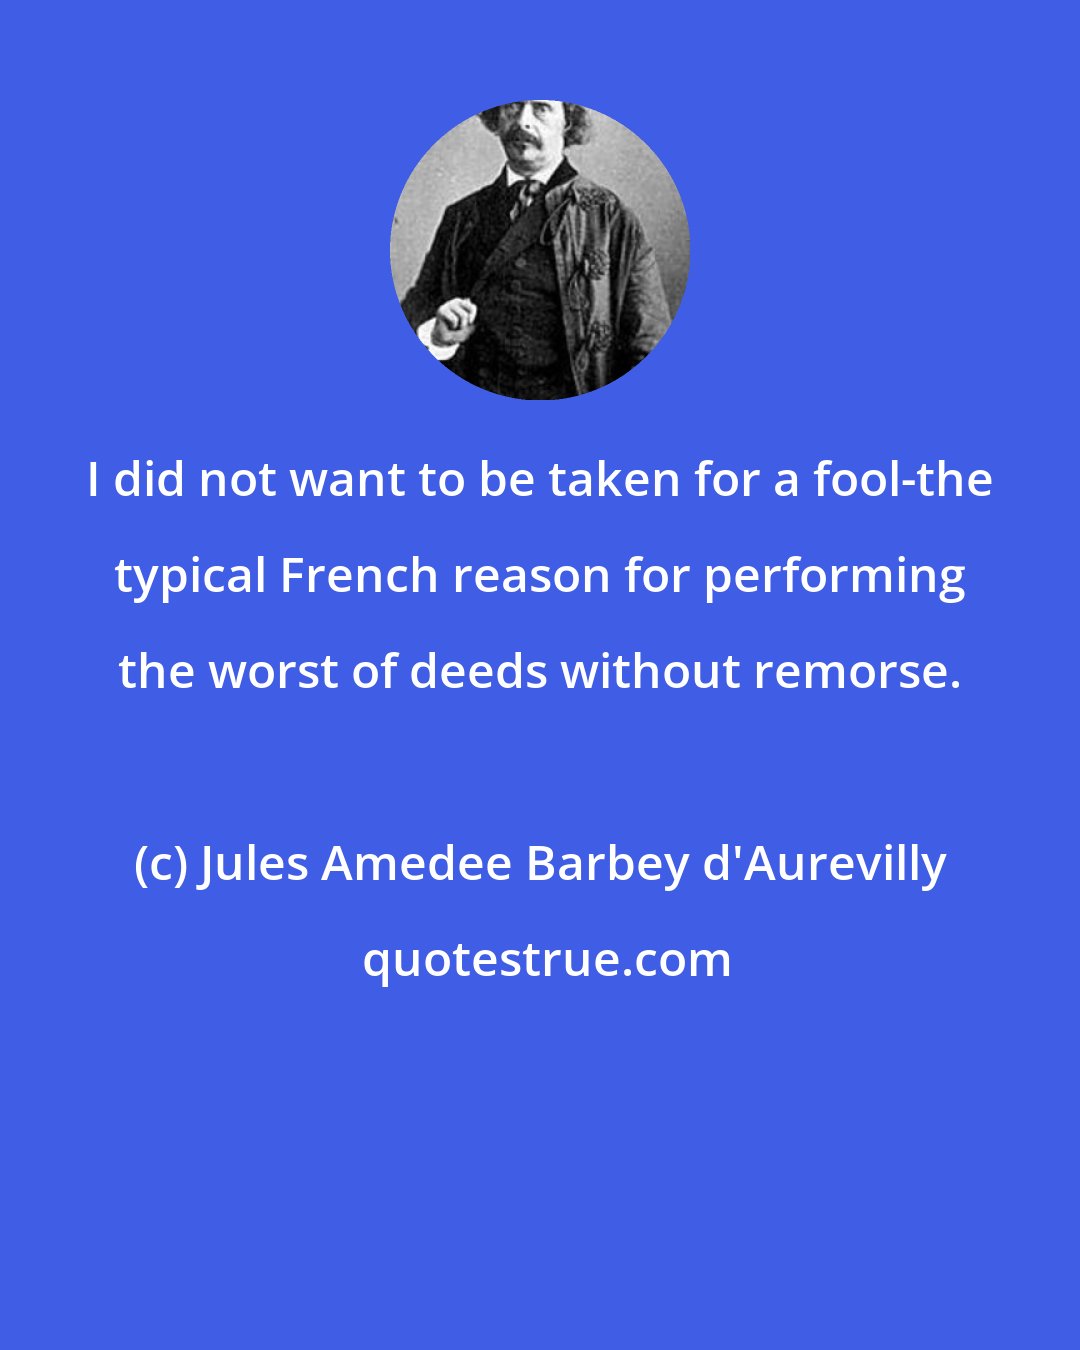 Jules Amedee Barbey d'Aurevilly: I did not want to be taken for a fool-the typical French reason for performing the worst of deeds without remorse.